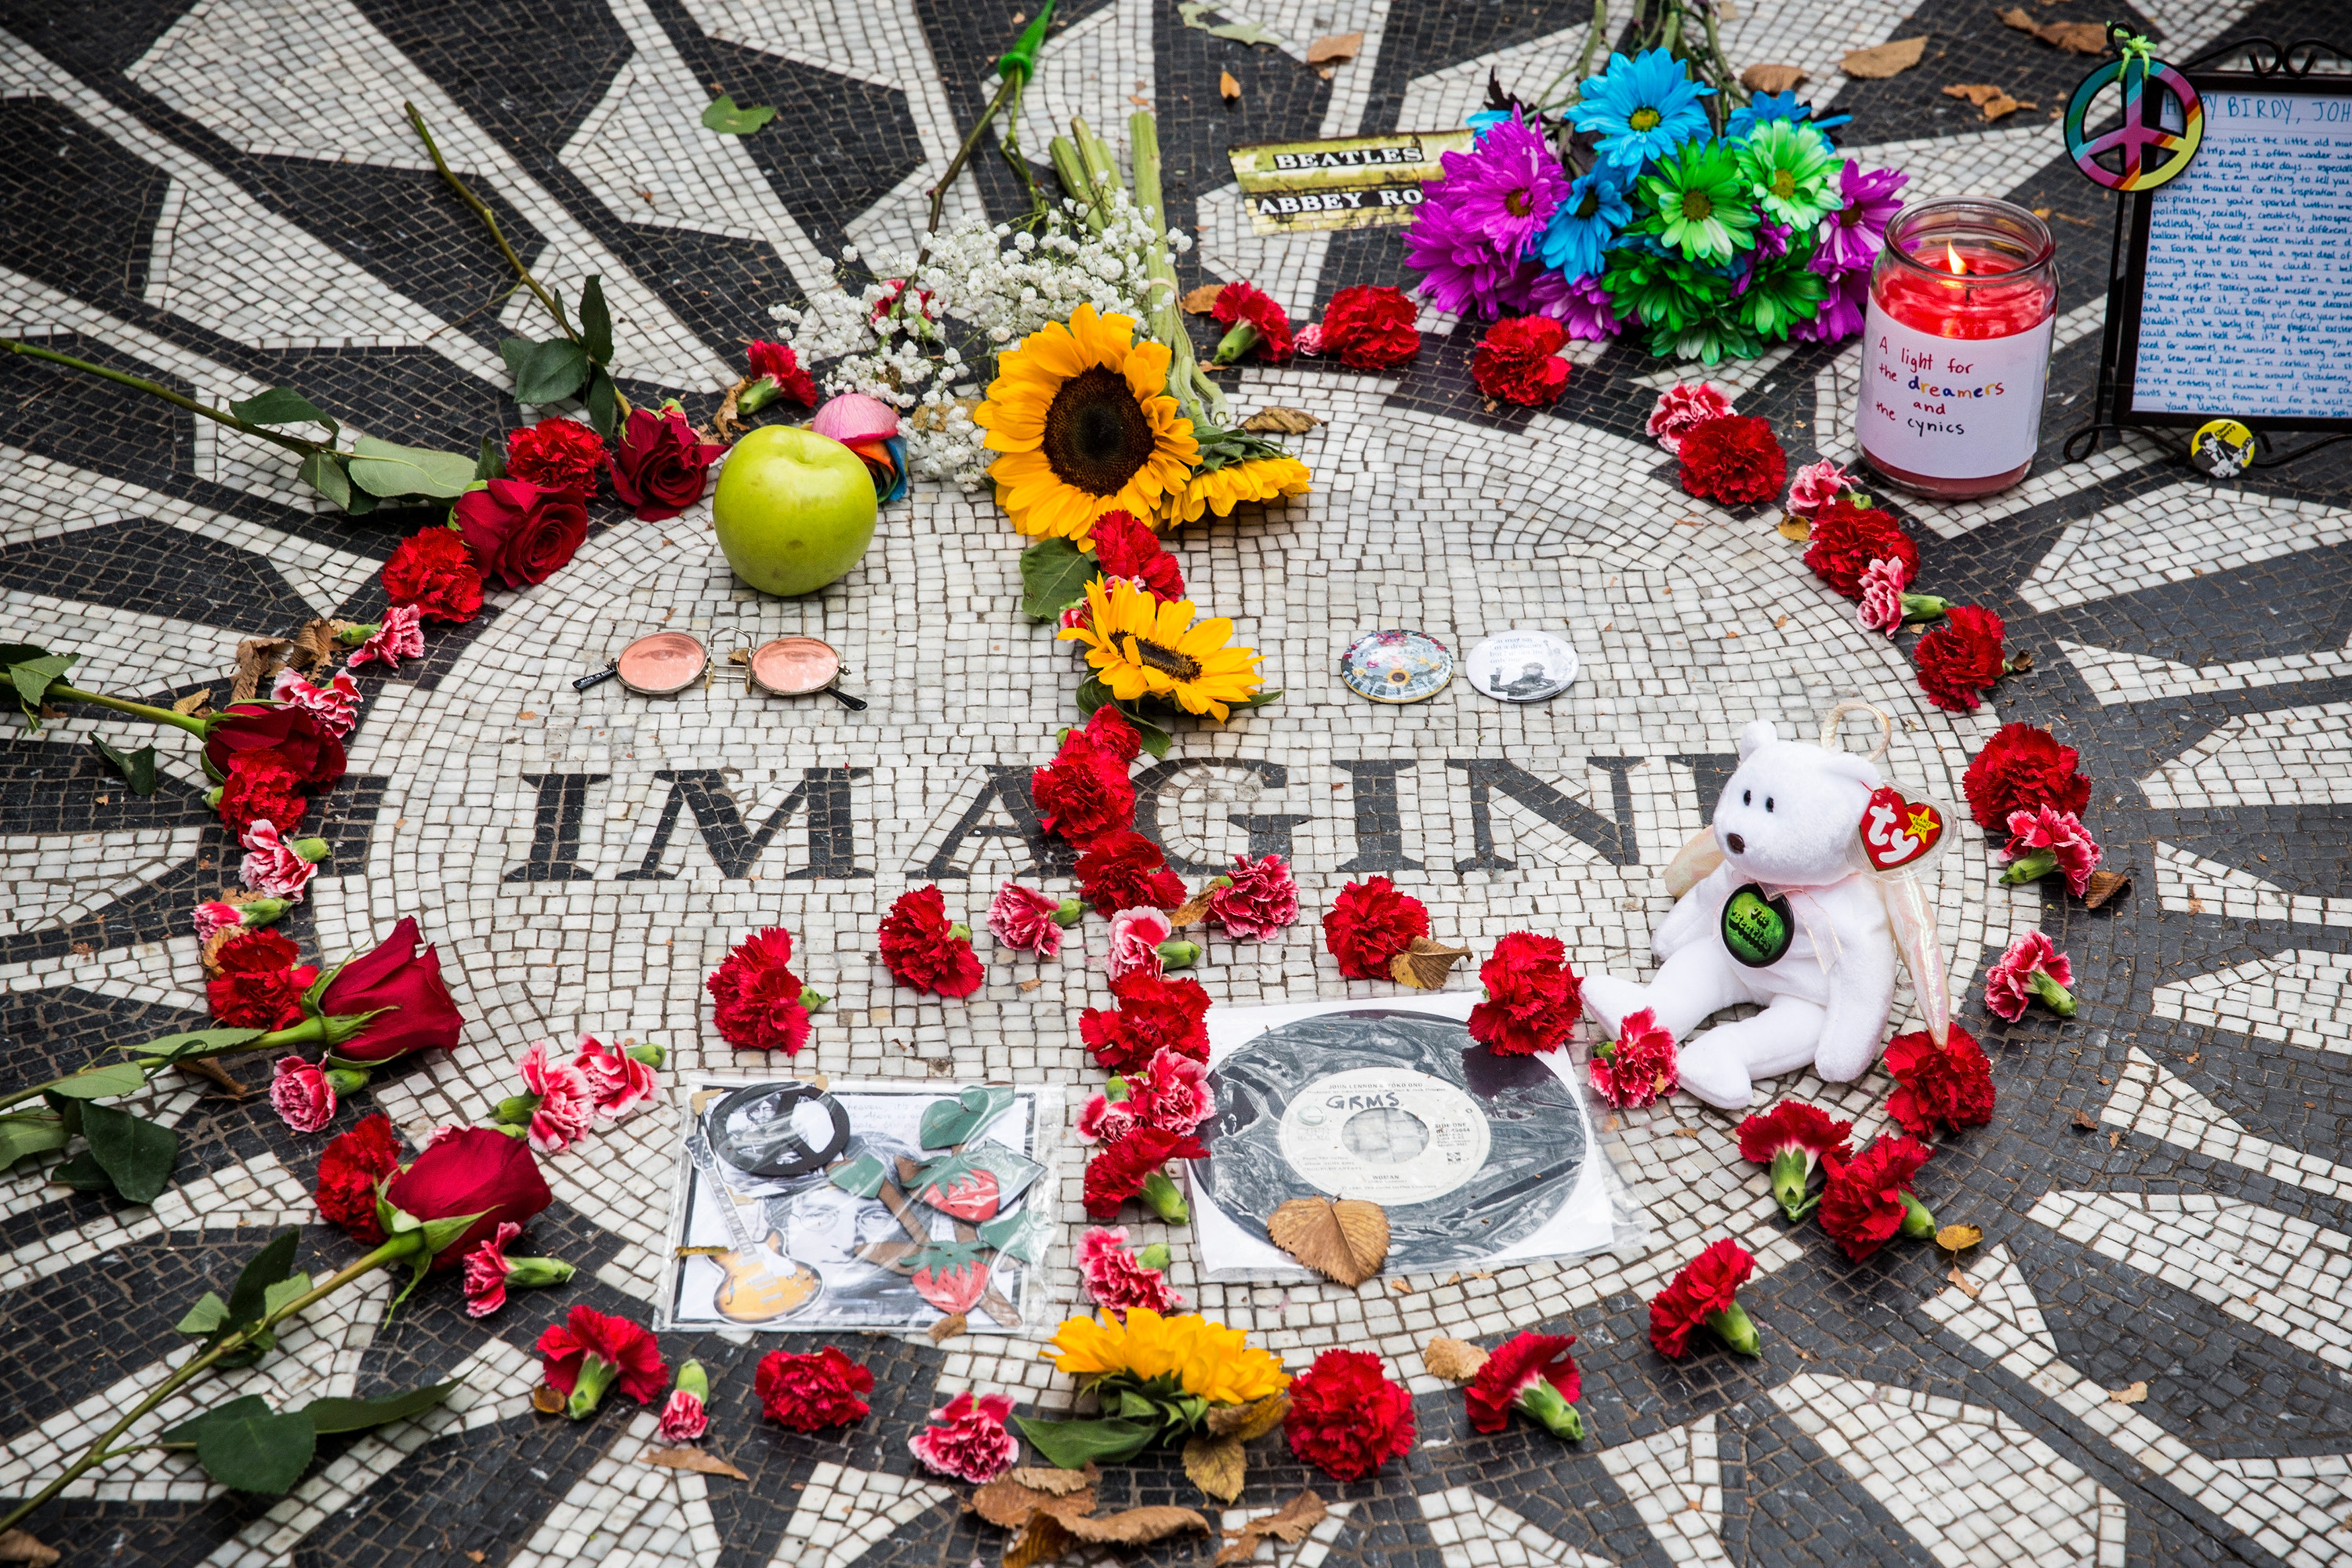 A memorial to John Lennon with a peace sign on it